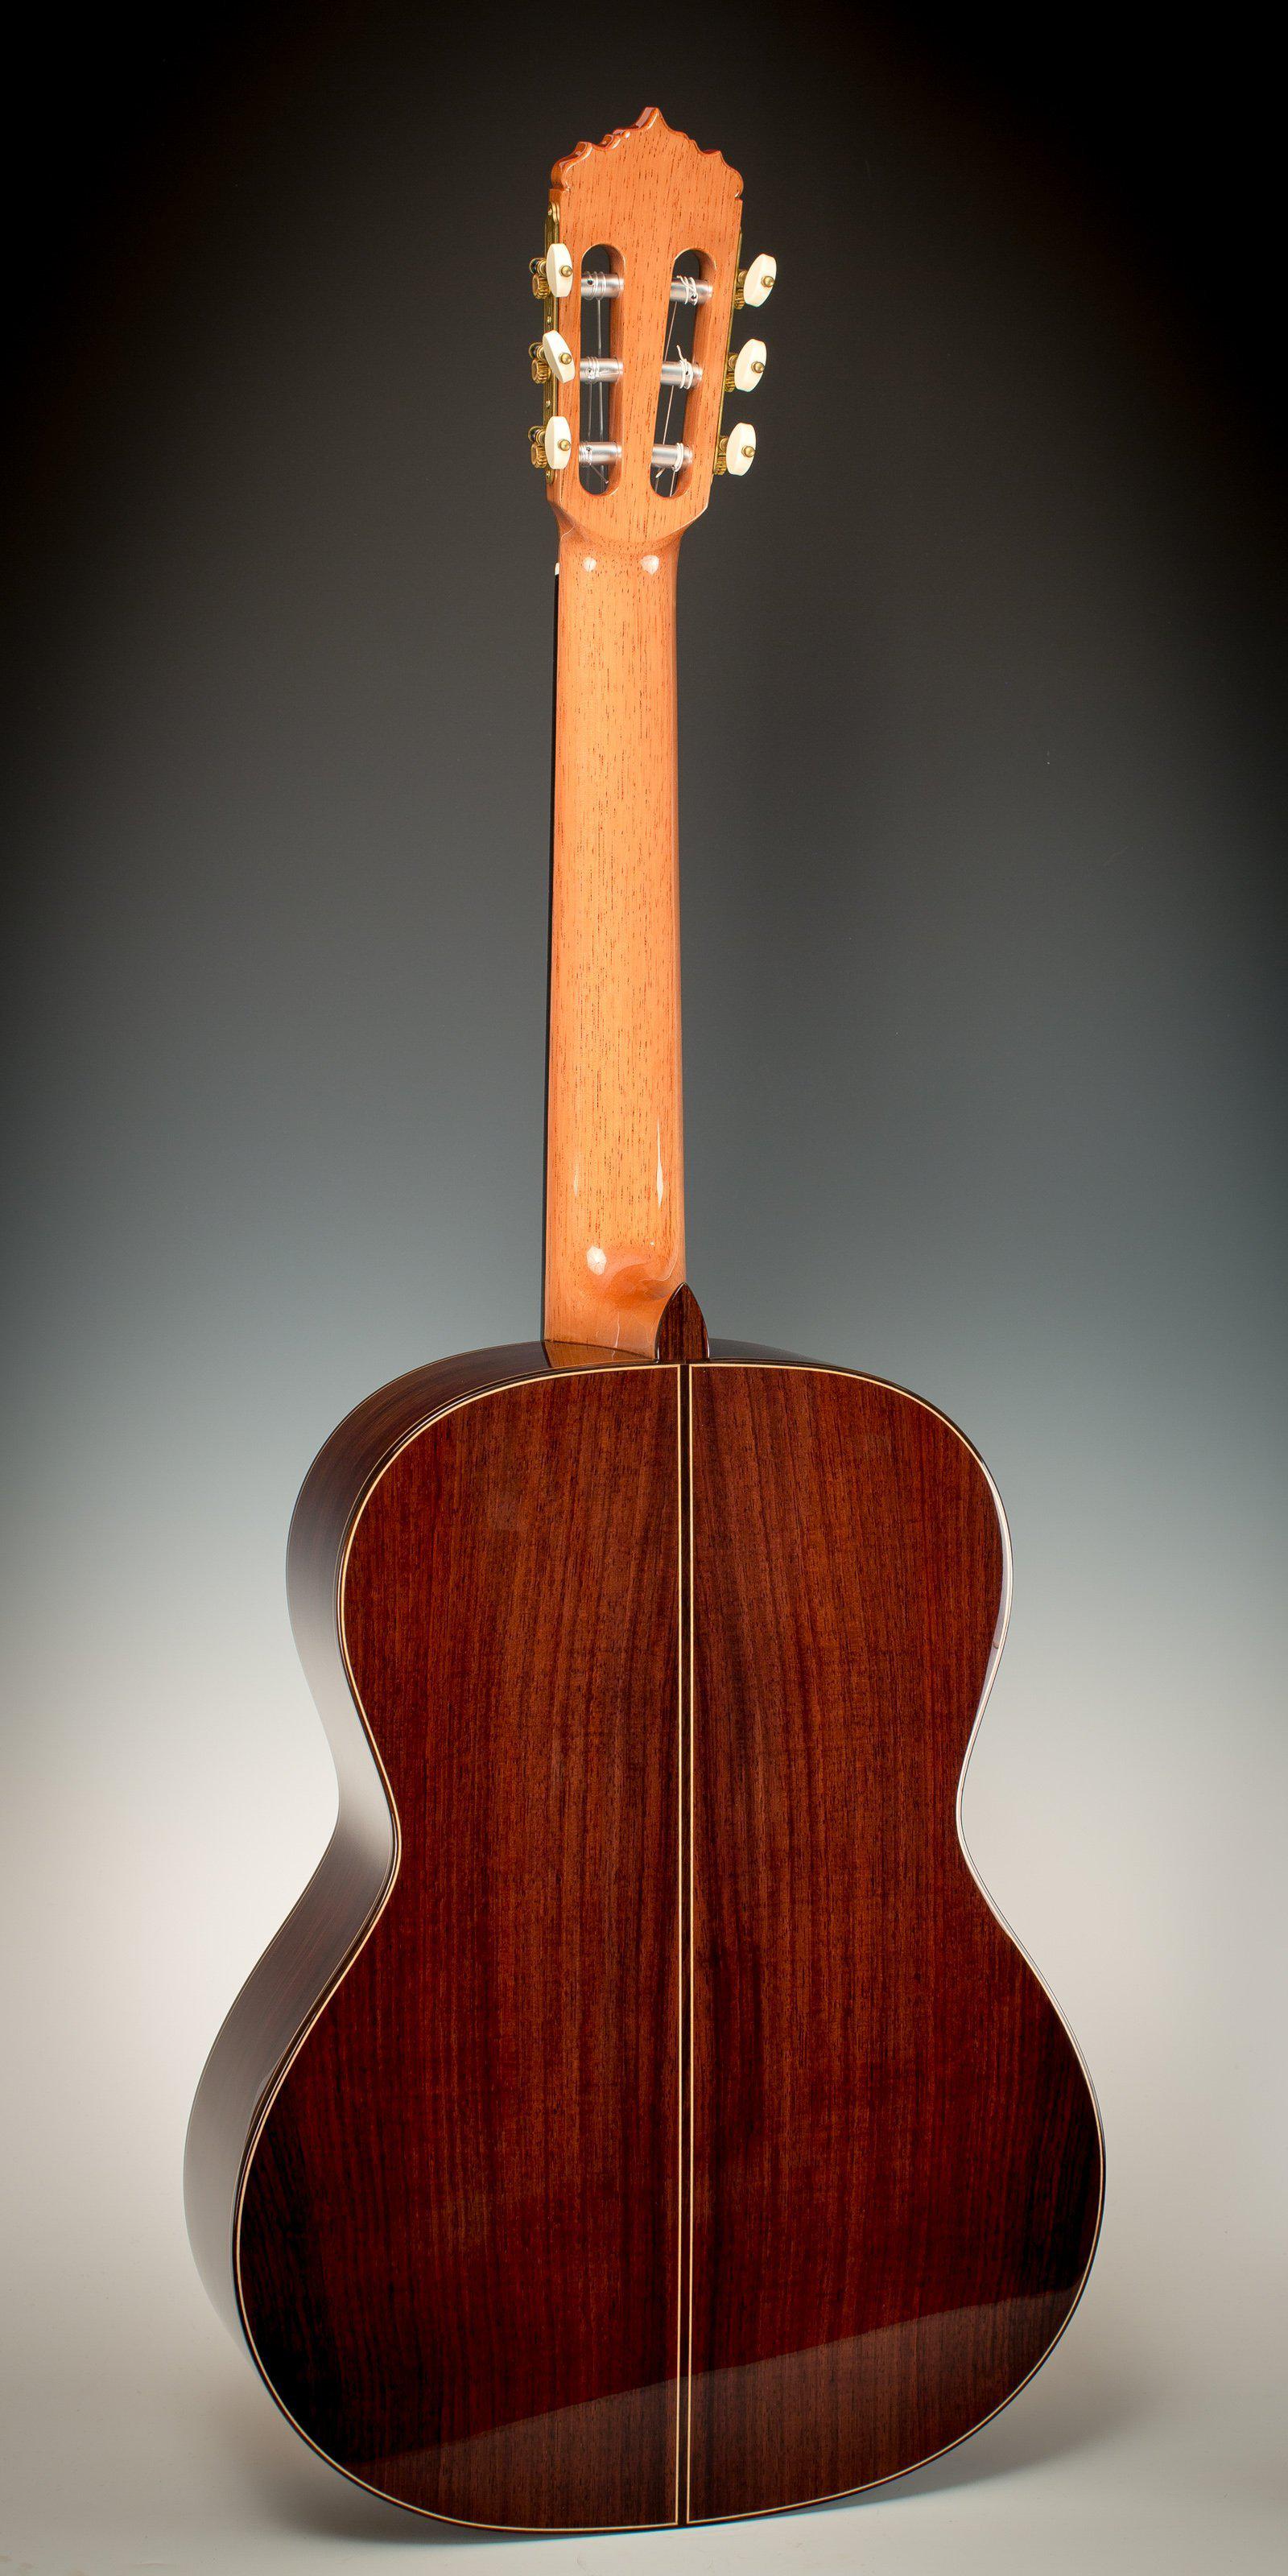 Alhambra Linea Profesional Spruce Top Classical Guitar